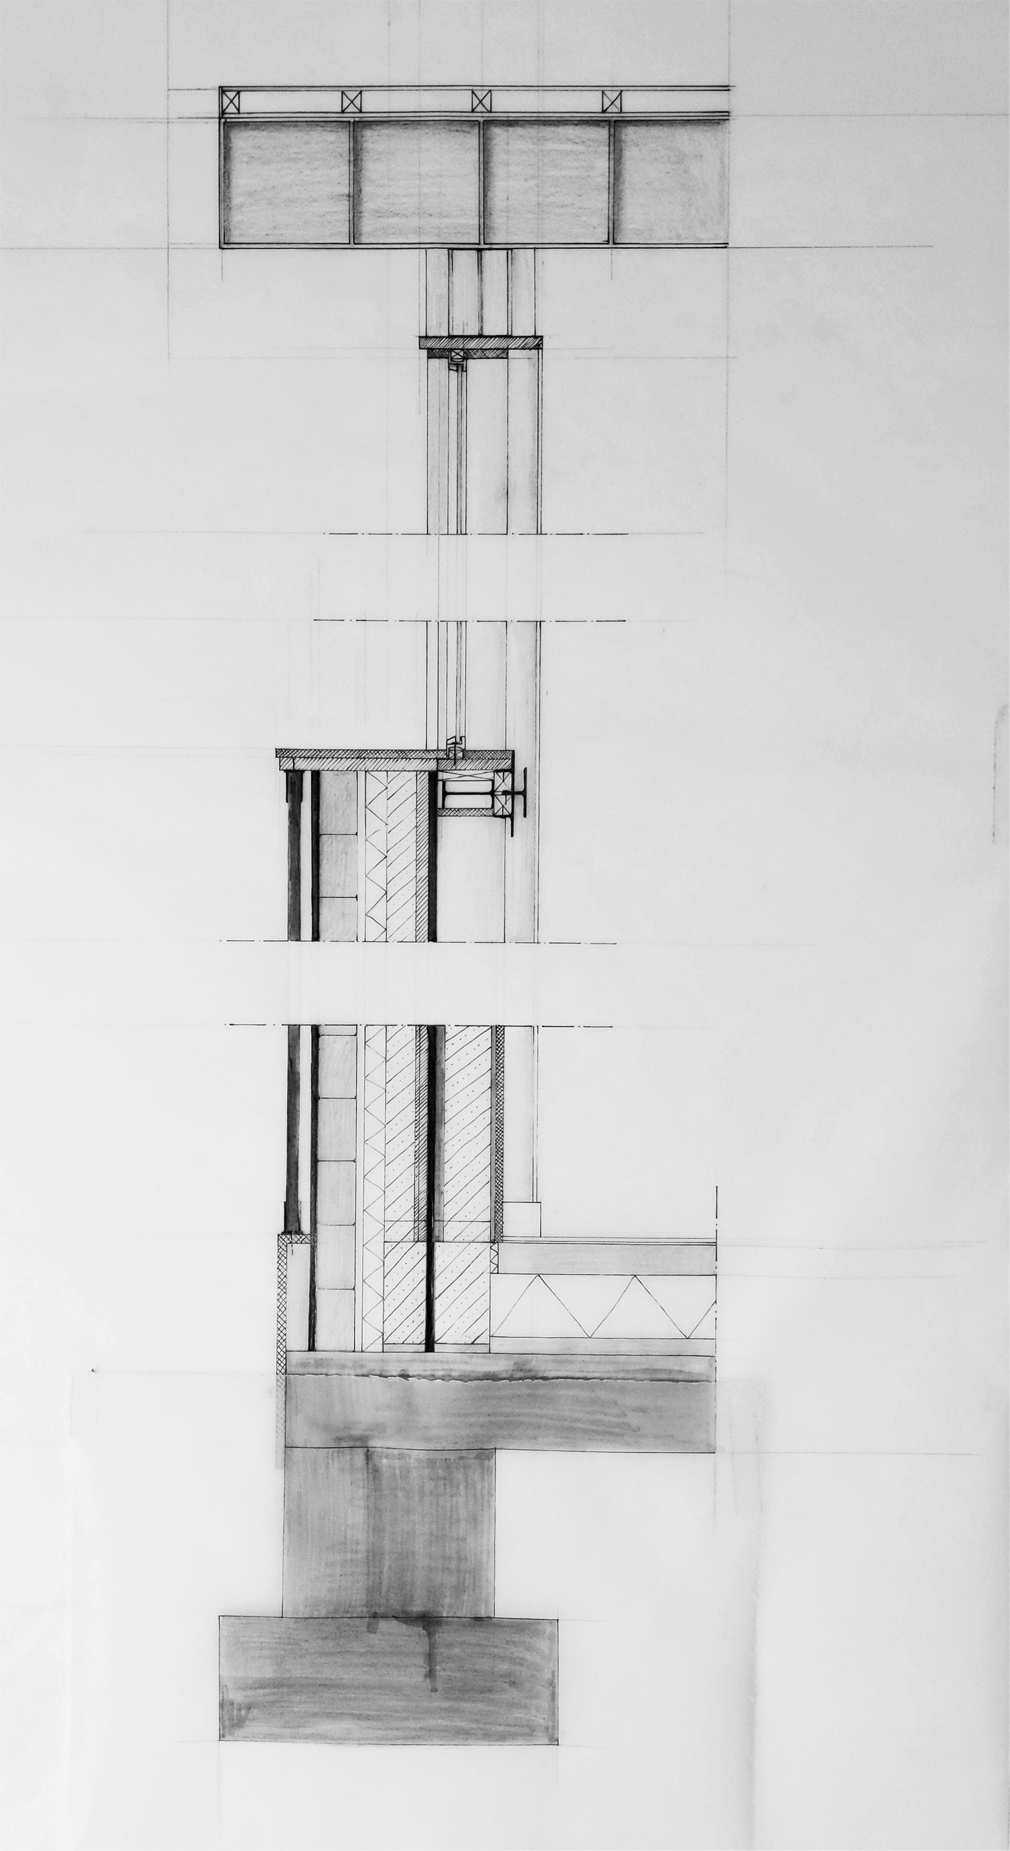 Construction detail foundation-wall-column-roof, scale 1:10, pencil and pen on tracing paper